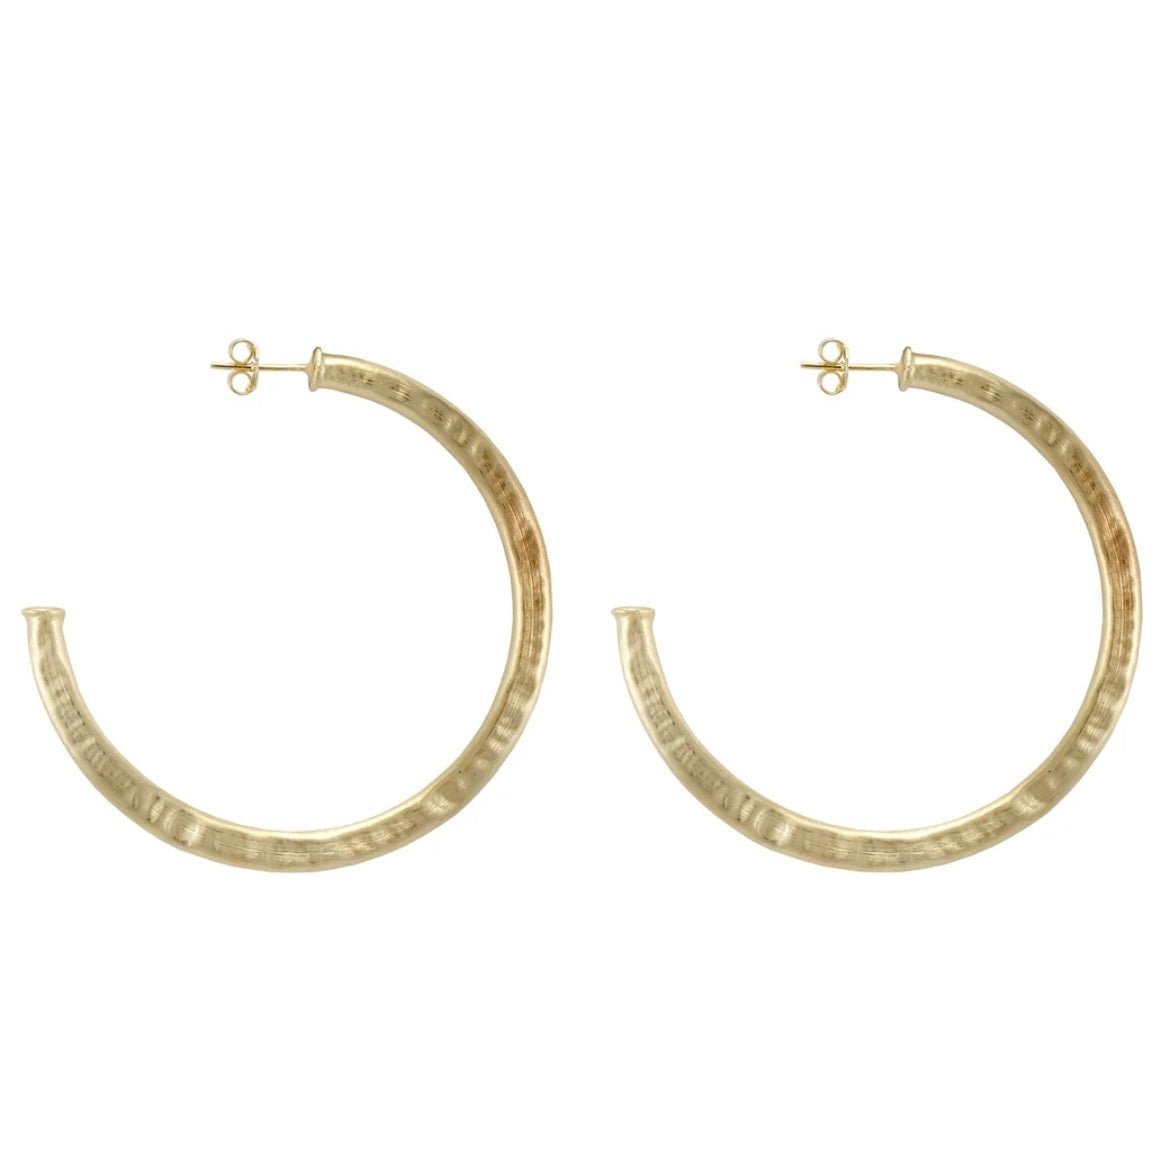 Sheila Fajl Everybody's Favorite Hoops 2" - Hammered Gold